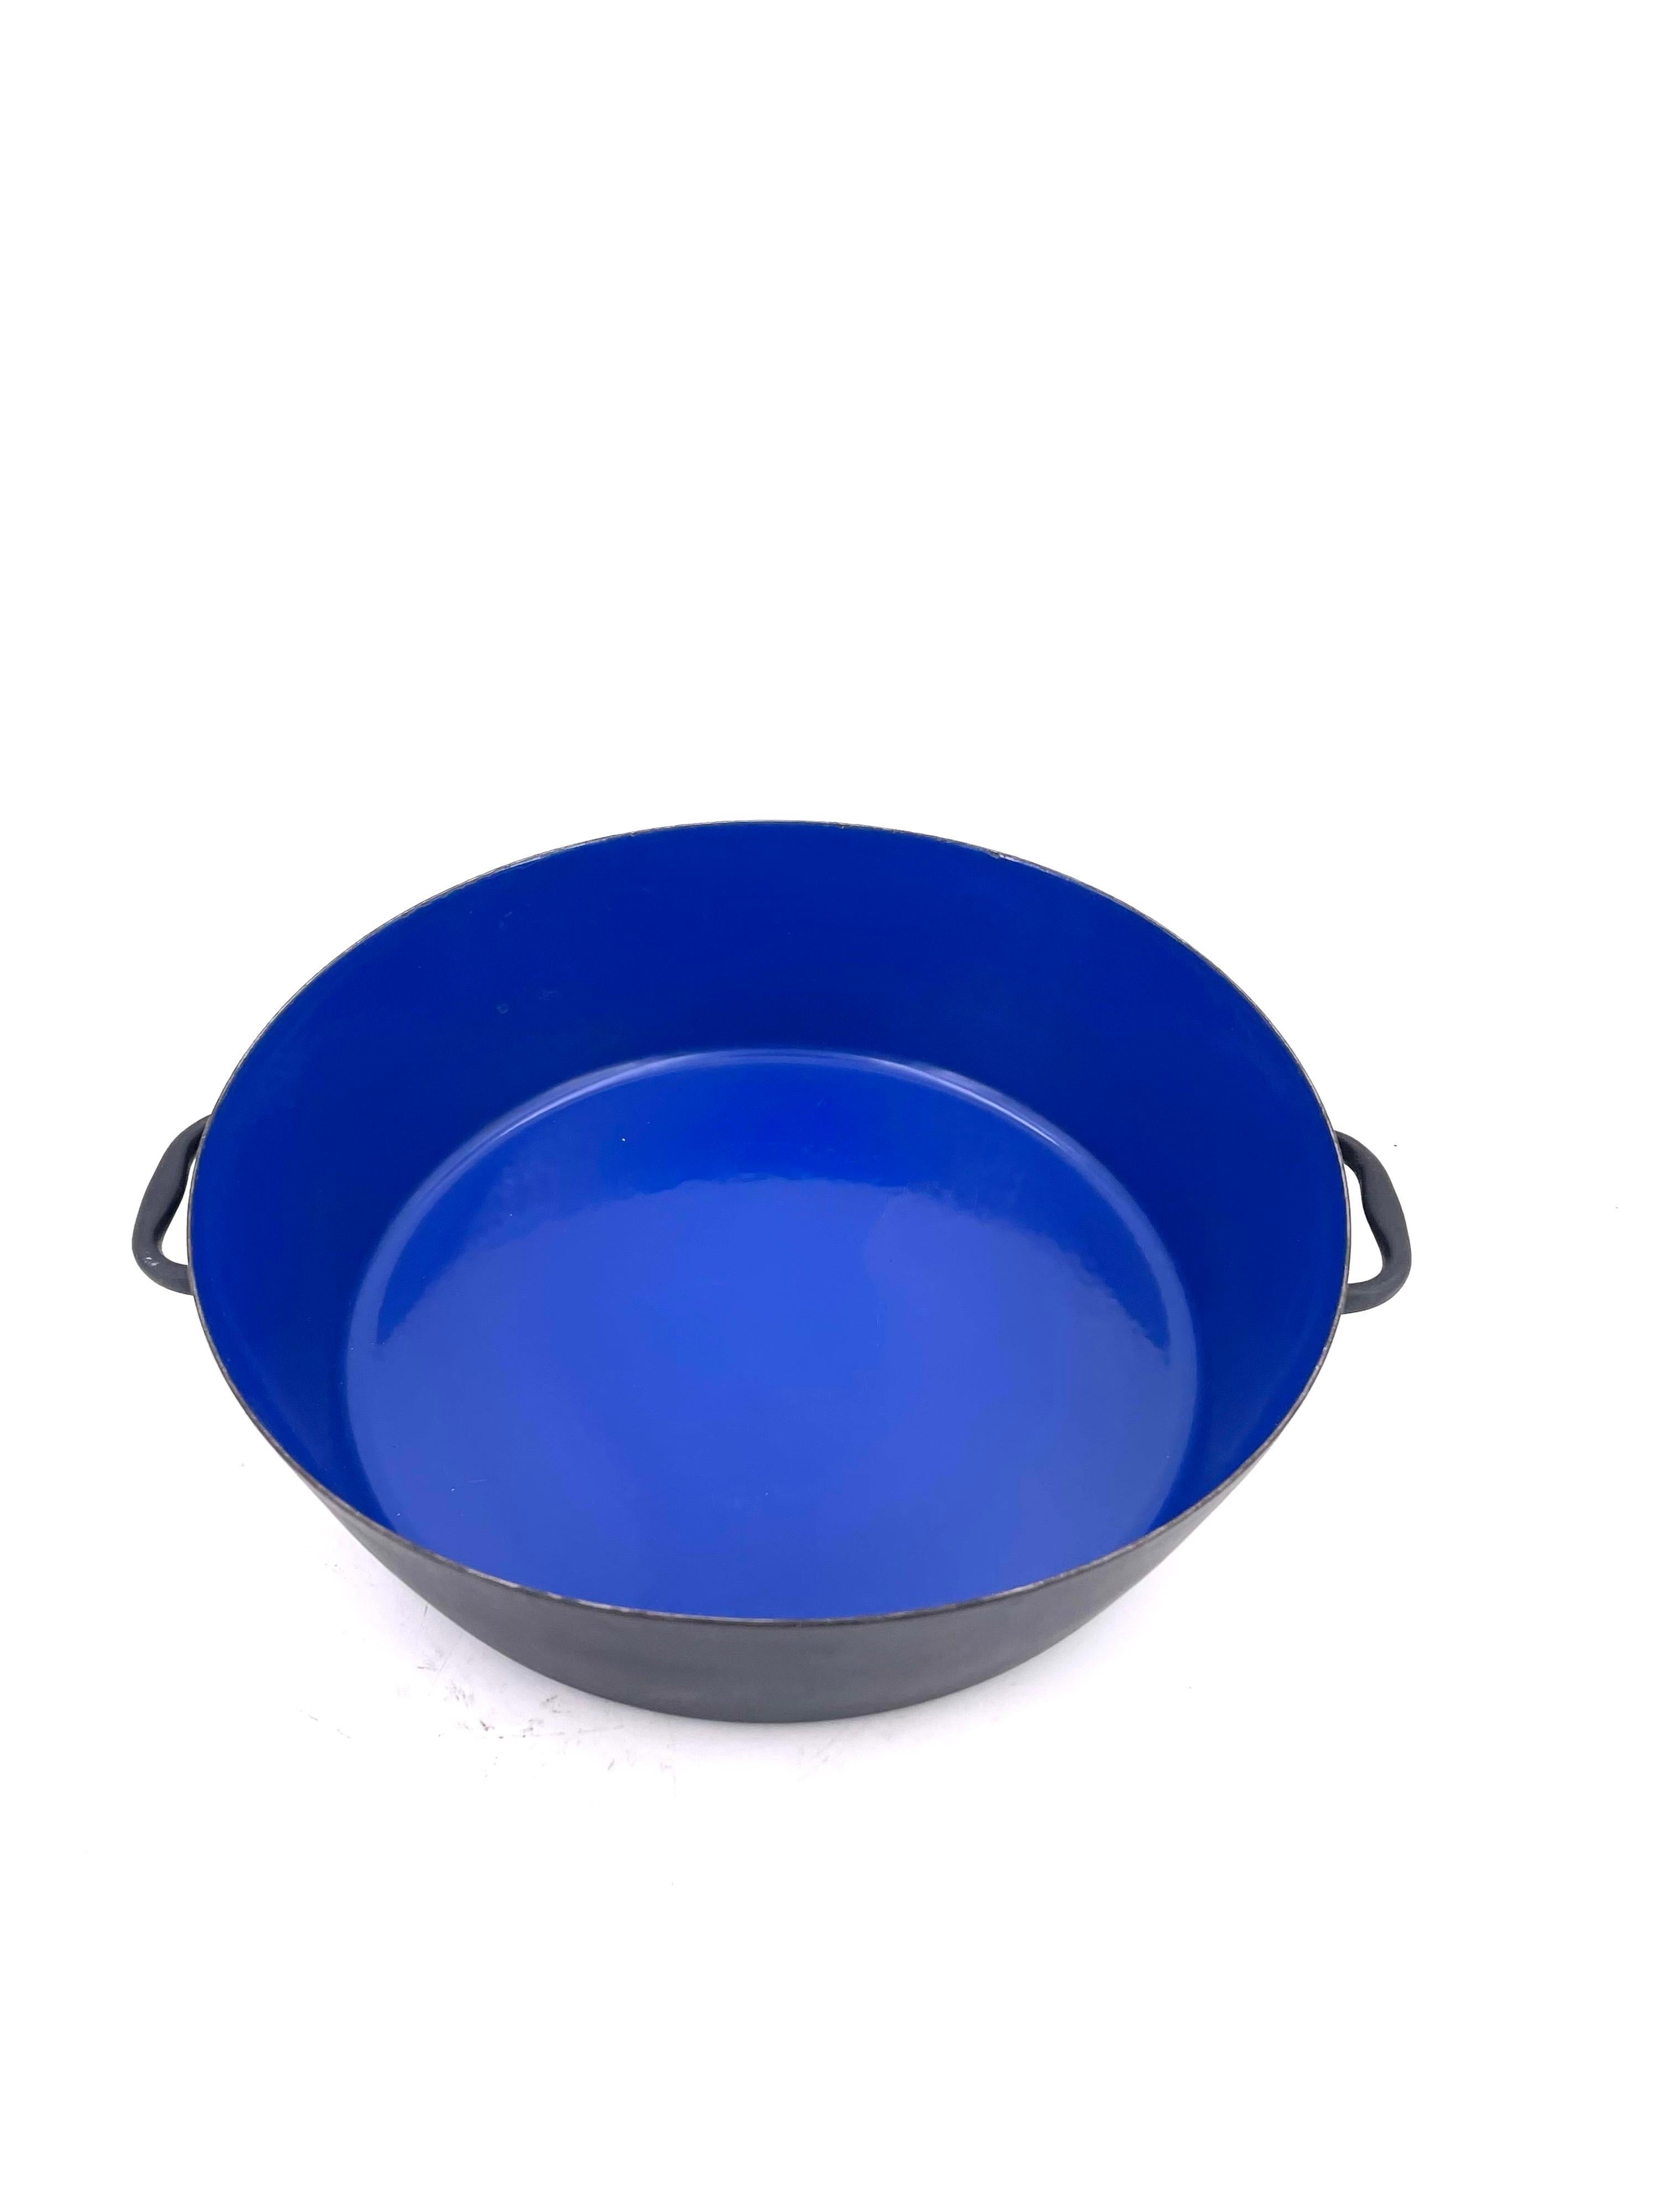 Danish modern blue enamel Krenit cooking bowl by Herbert Krenchel for Torben Orskov, circa 1950s. Beautiful color and condition on this vintage piece with no chips to the enamel, but some minor wear on the outside of the bowl. Signed on the